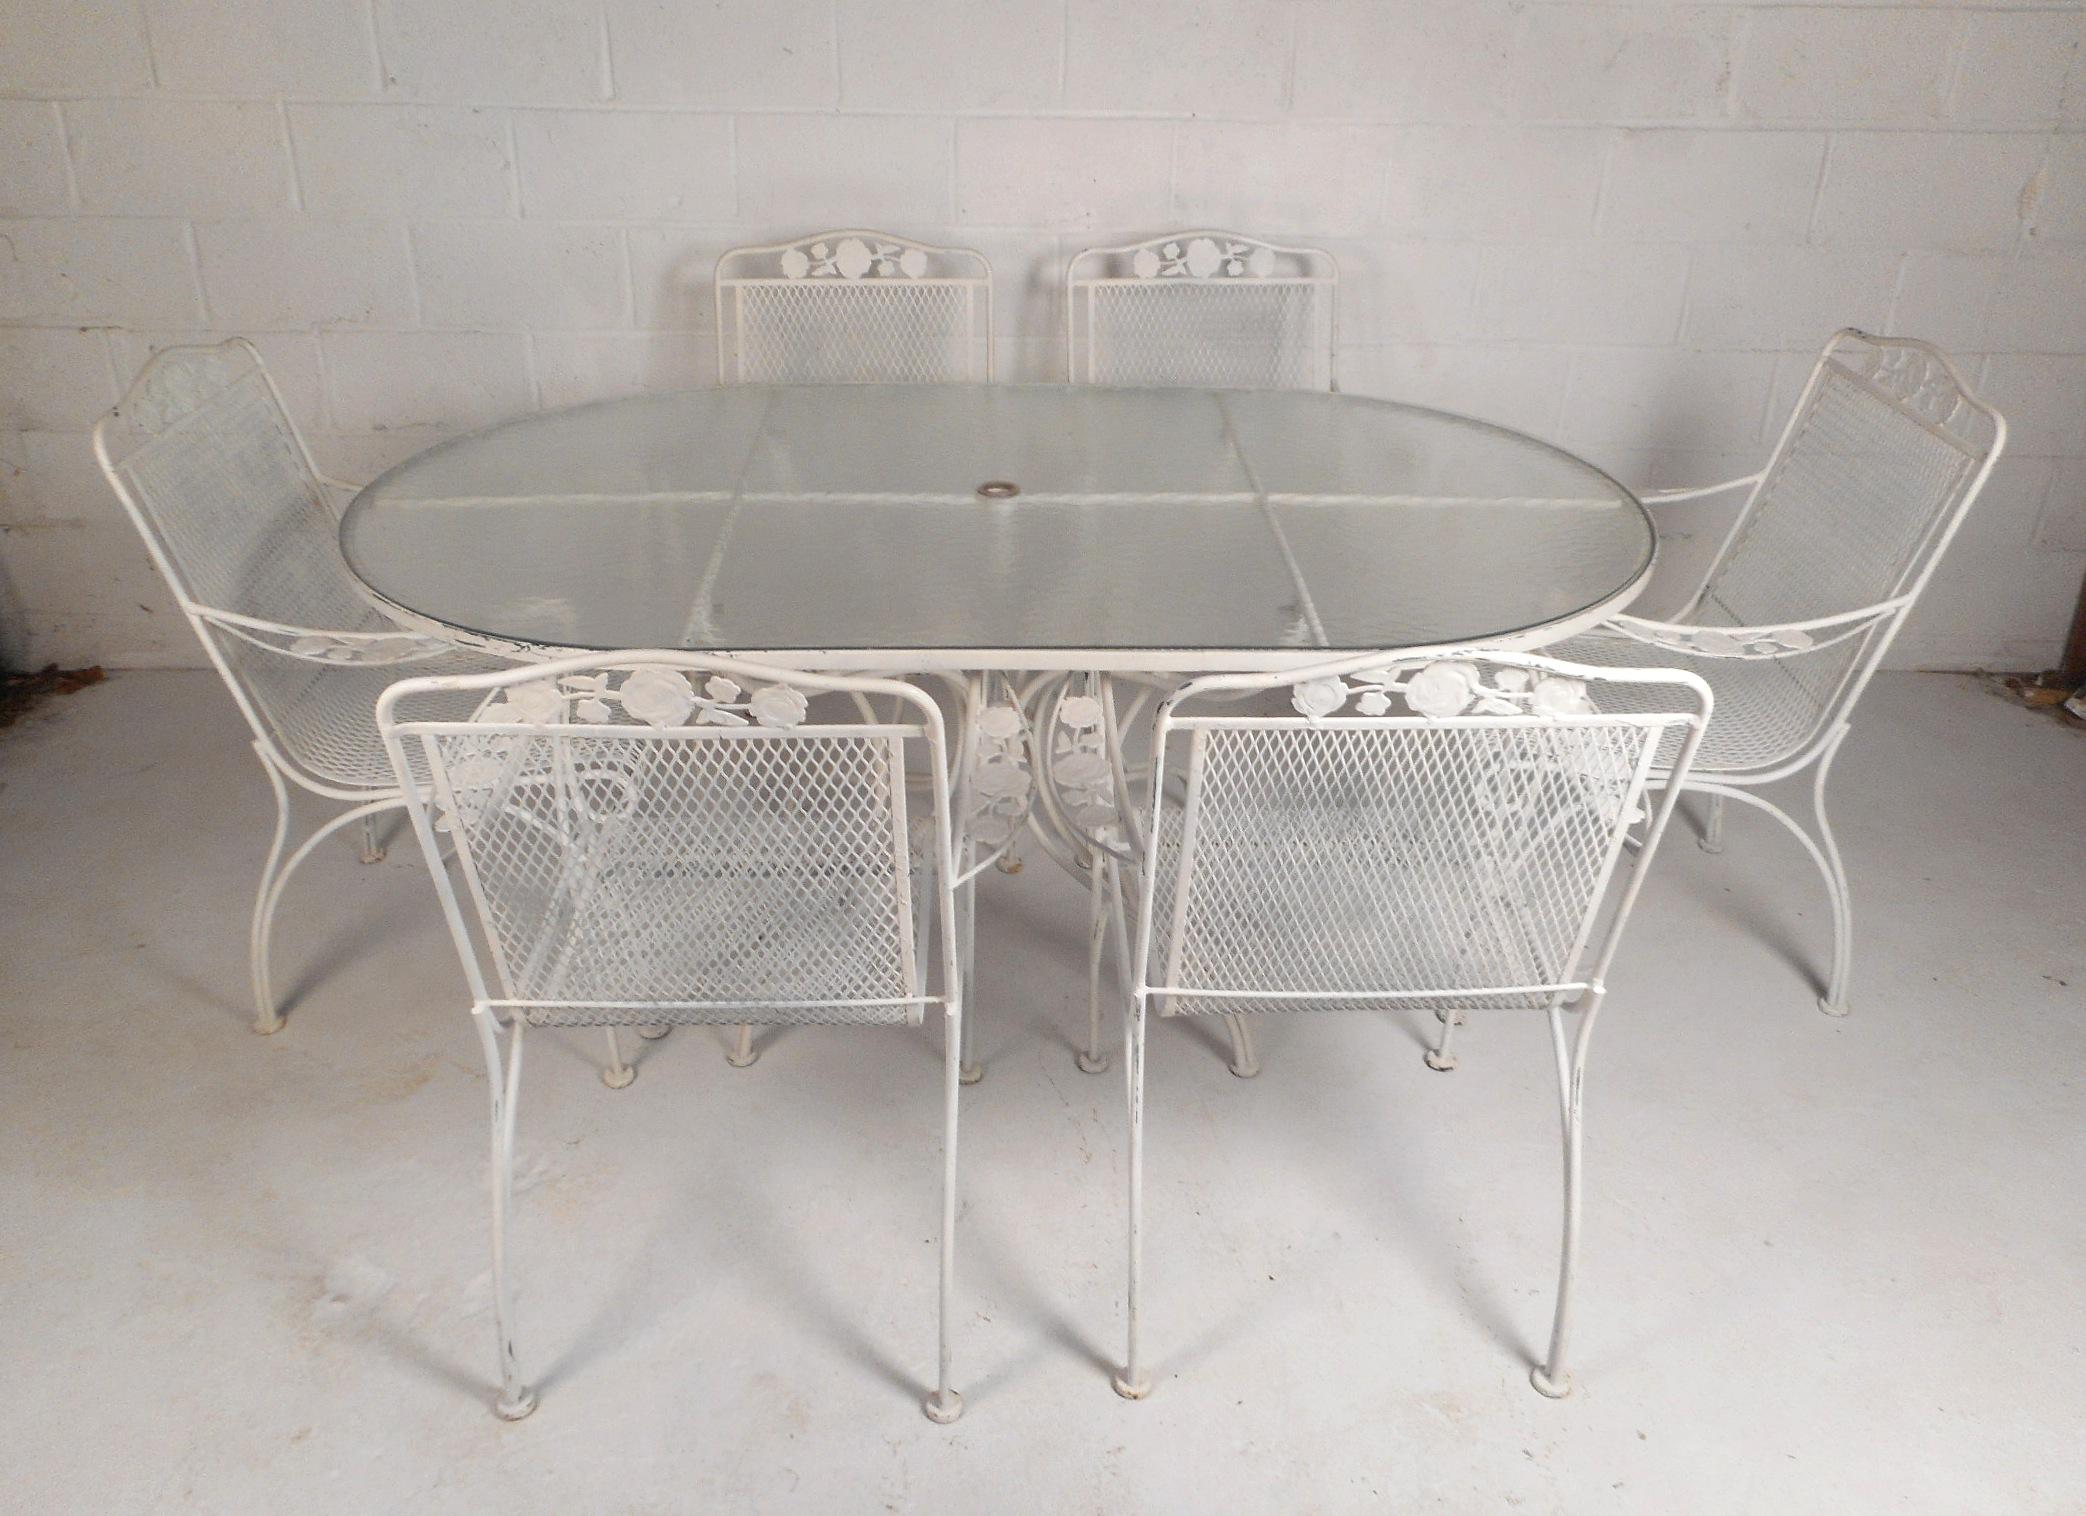 This beautiful vintage modern patio set includes a large oval dining table with a tempered frosted glass top and six sculpted dining chairs. The sleek set of chairs feature a bent rod iron frame, floral detail, and grated seats offering plenty of